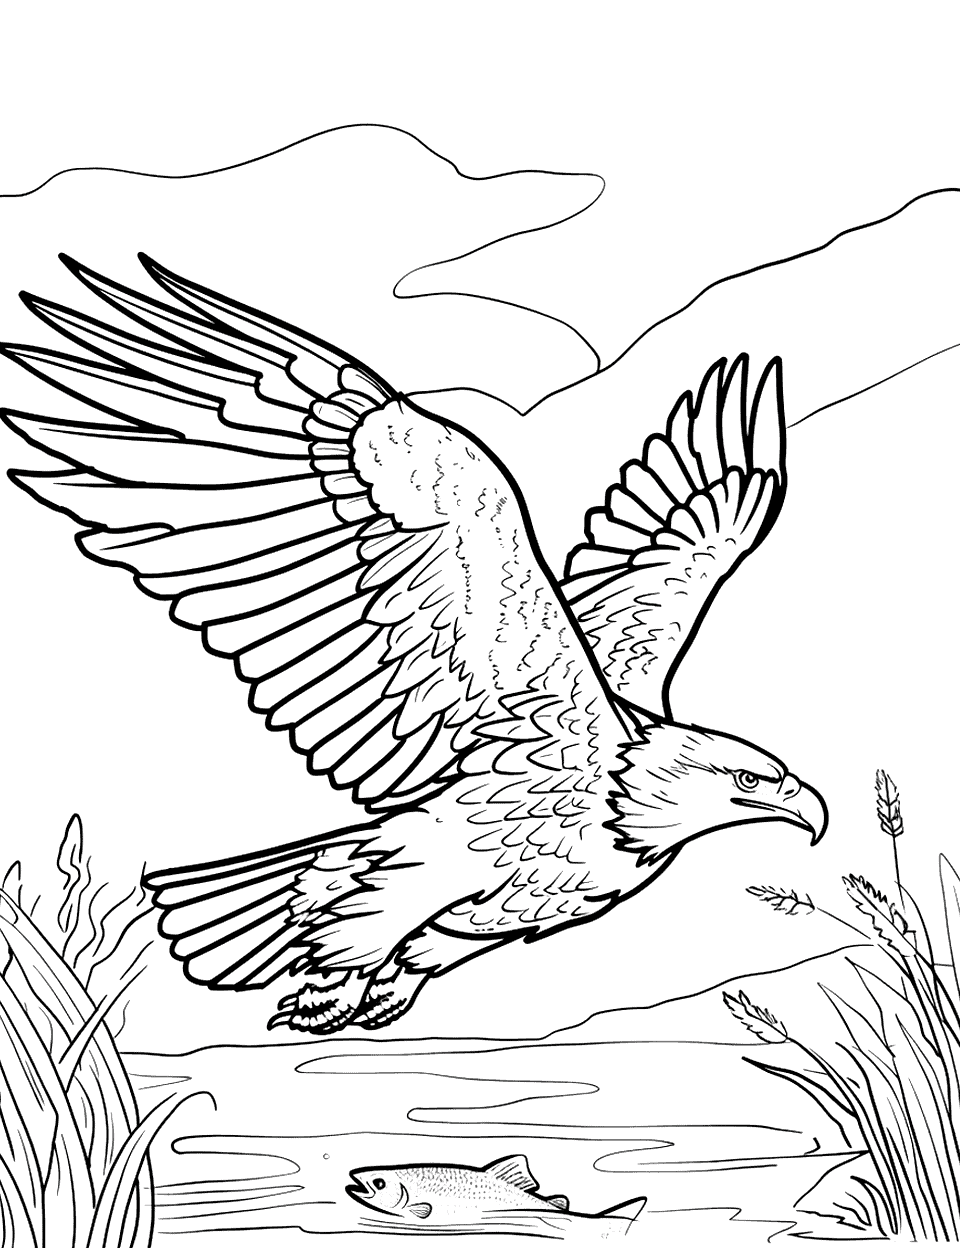 Eagle Diving for Fish Coloring Page - An eagle swoops down toward a clear river, ready to snatch a fish swimming just below the surface.